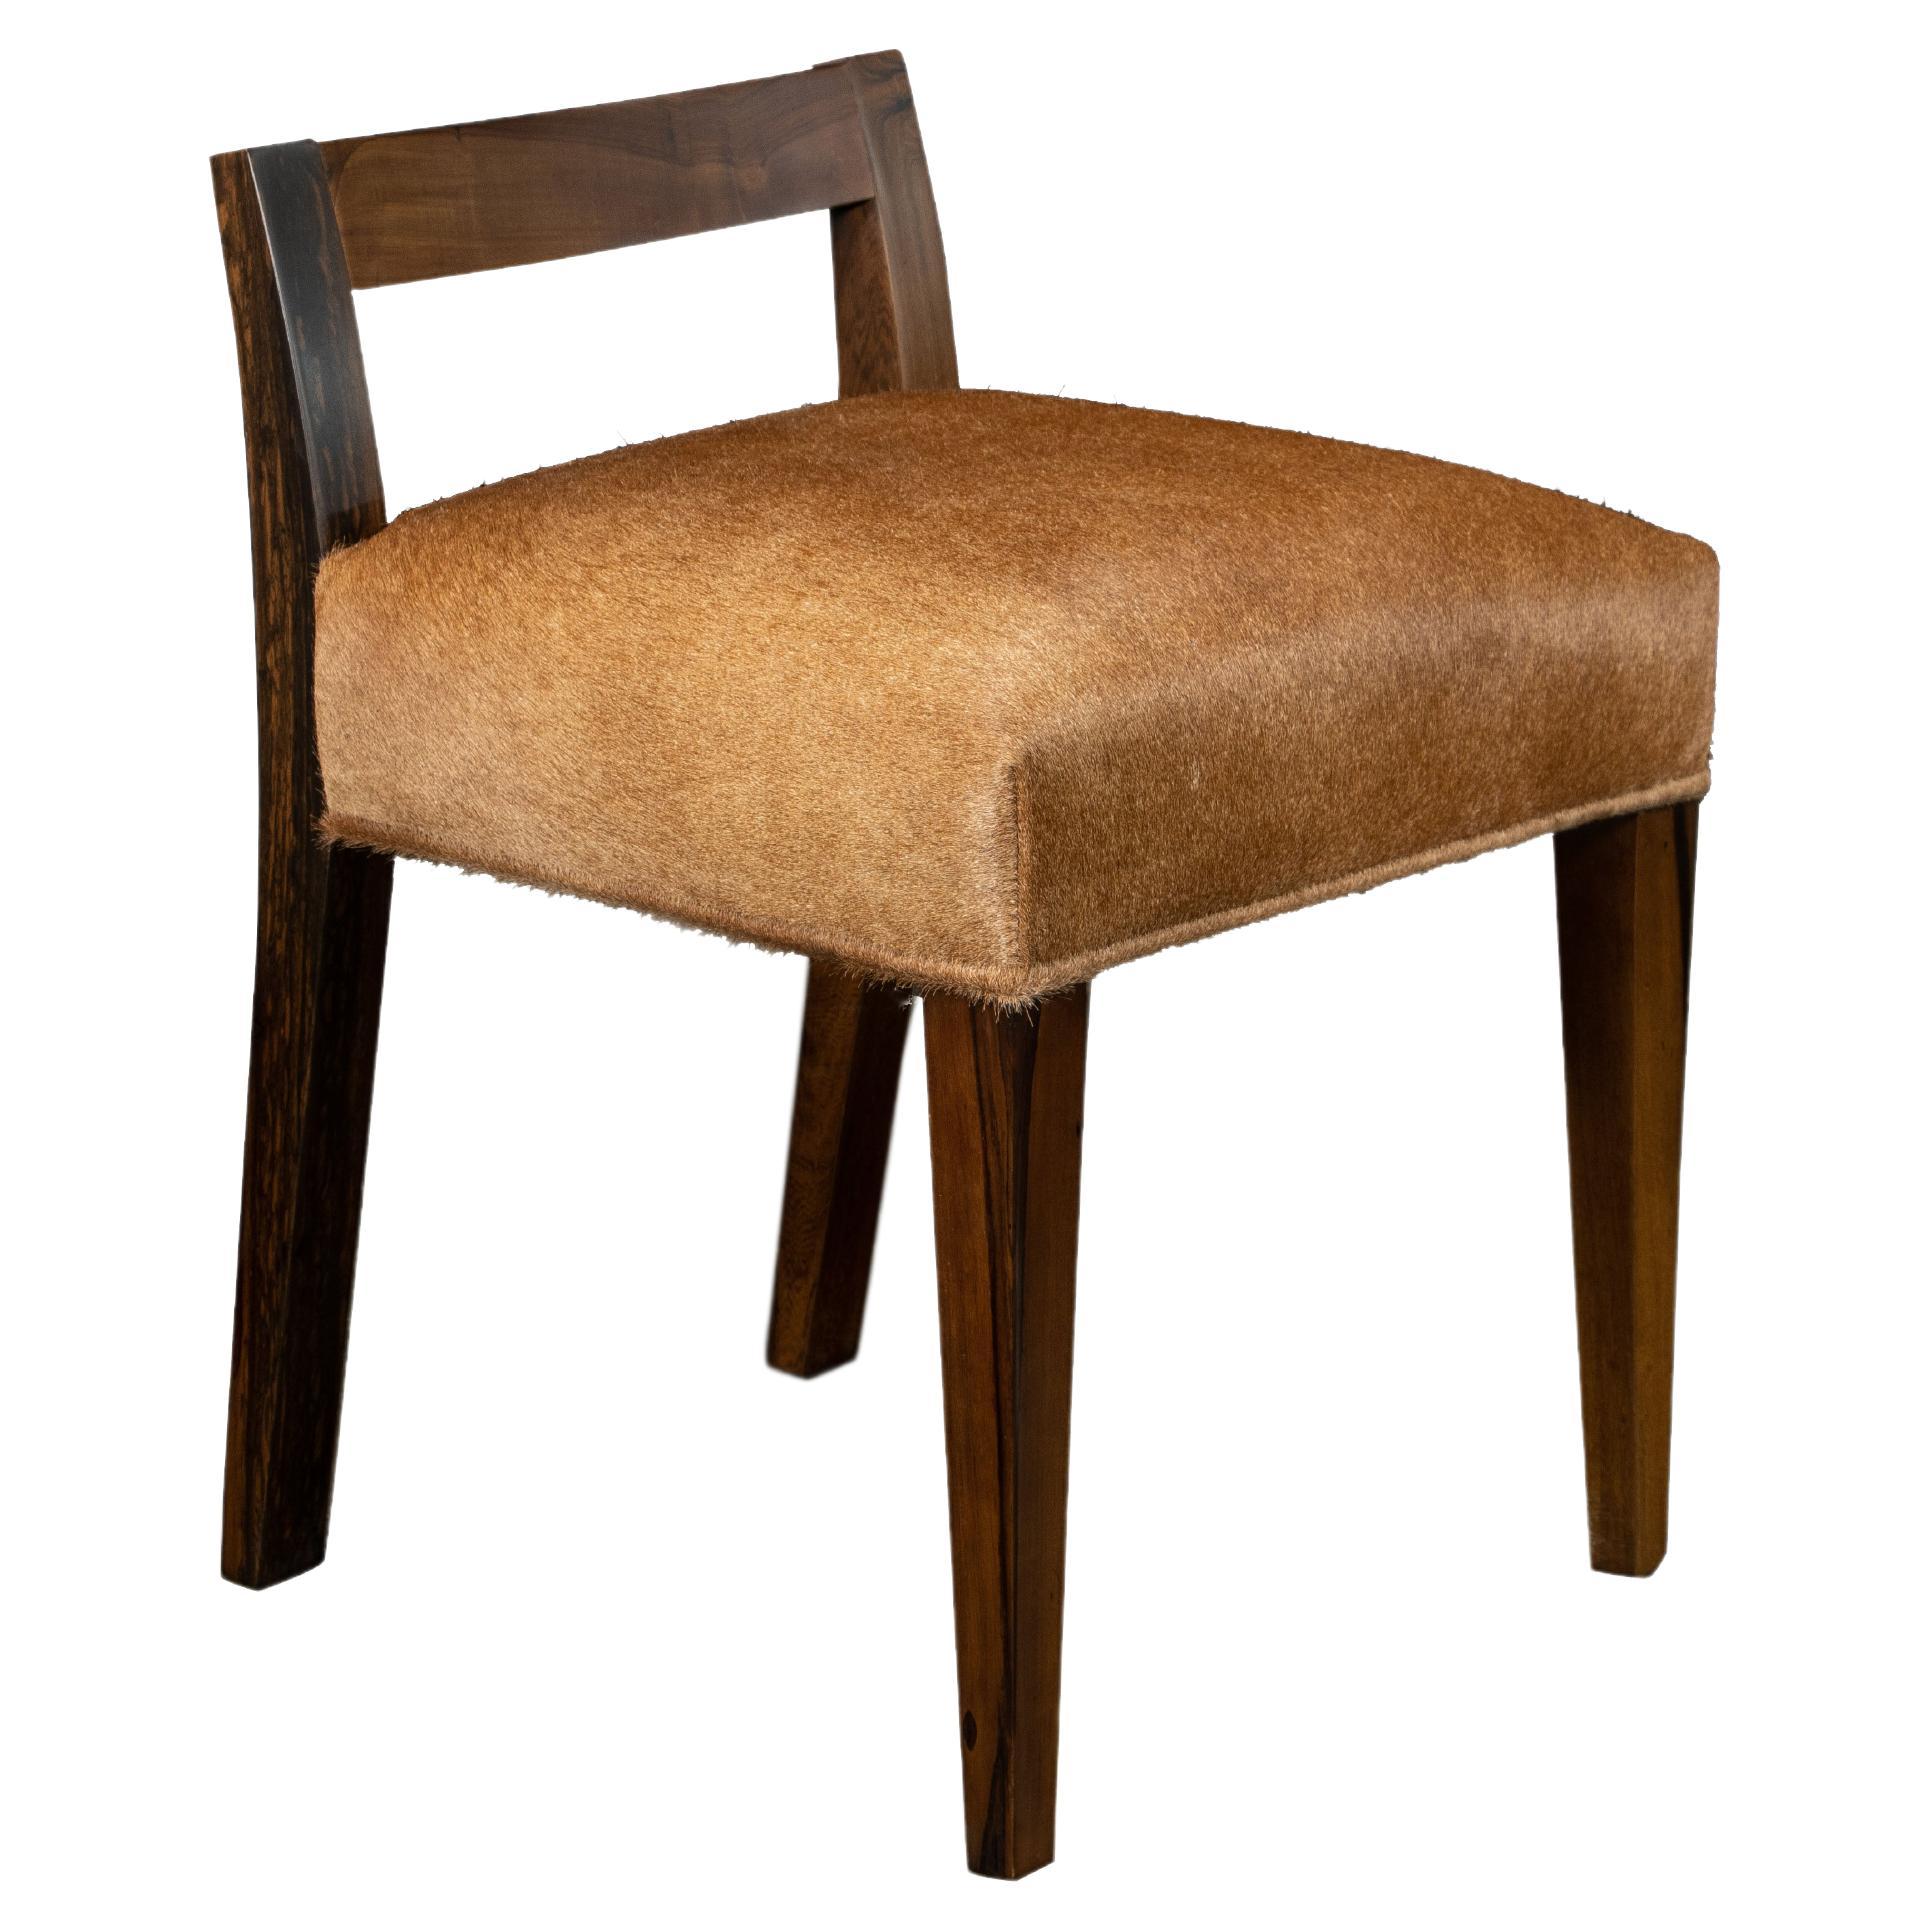 Modern Low Side Chair in Exotic Wood & Hair Hide from Costantini, Umberto 